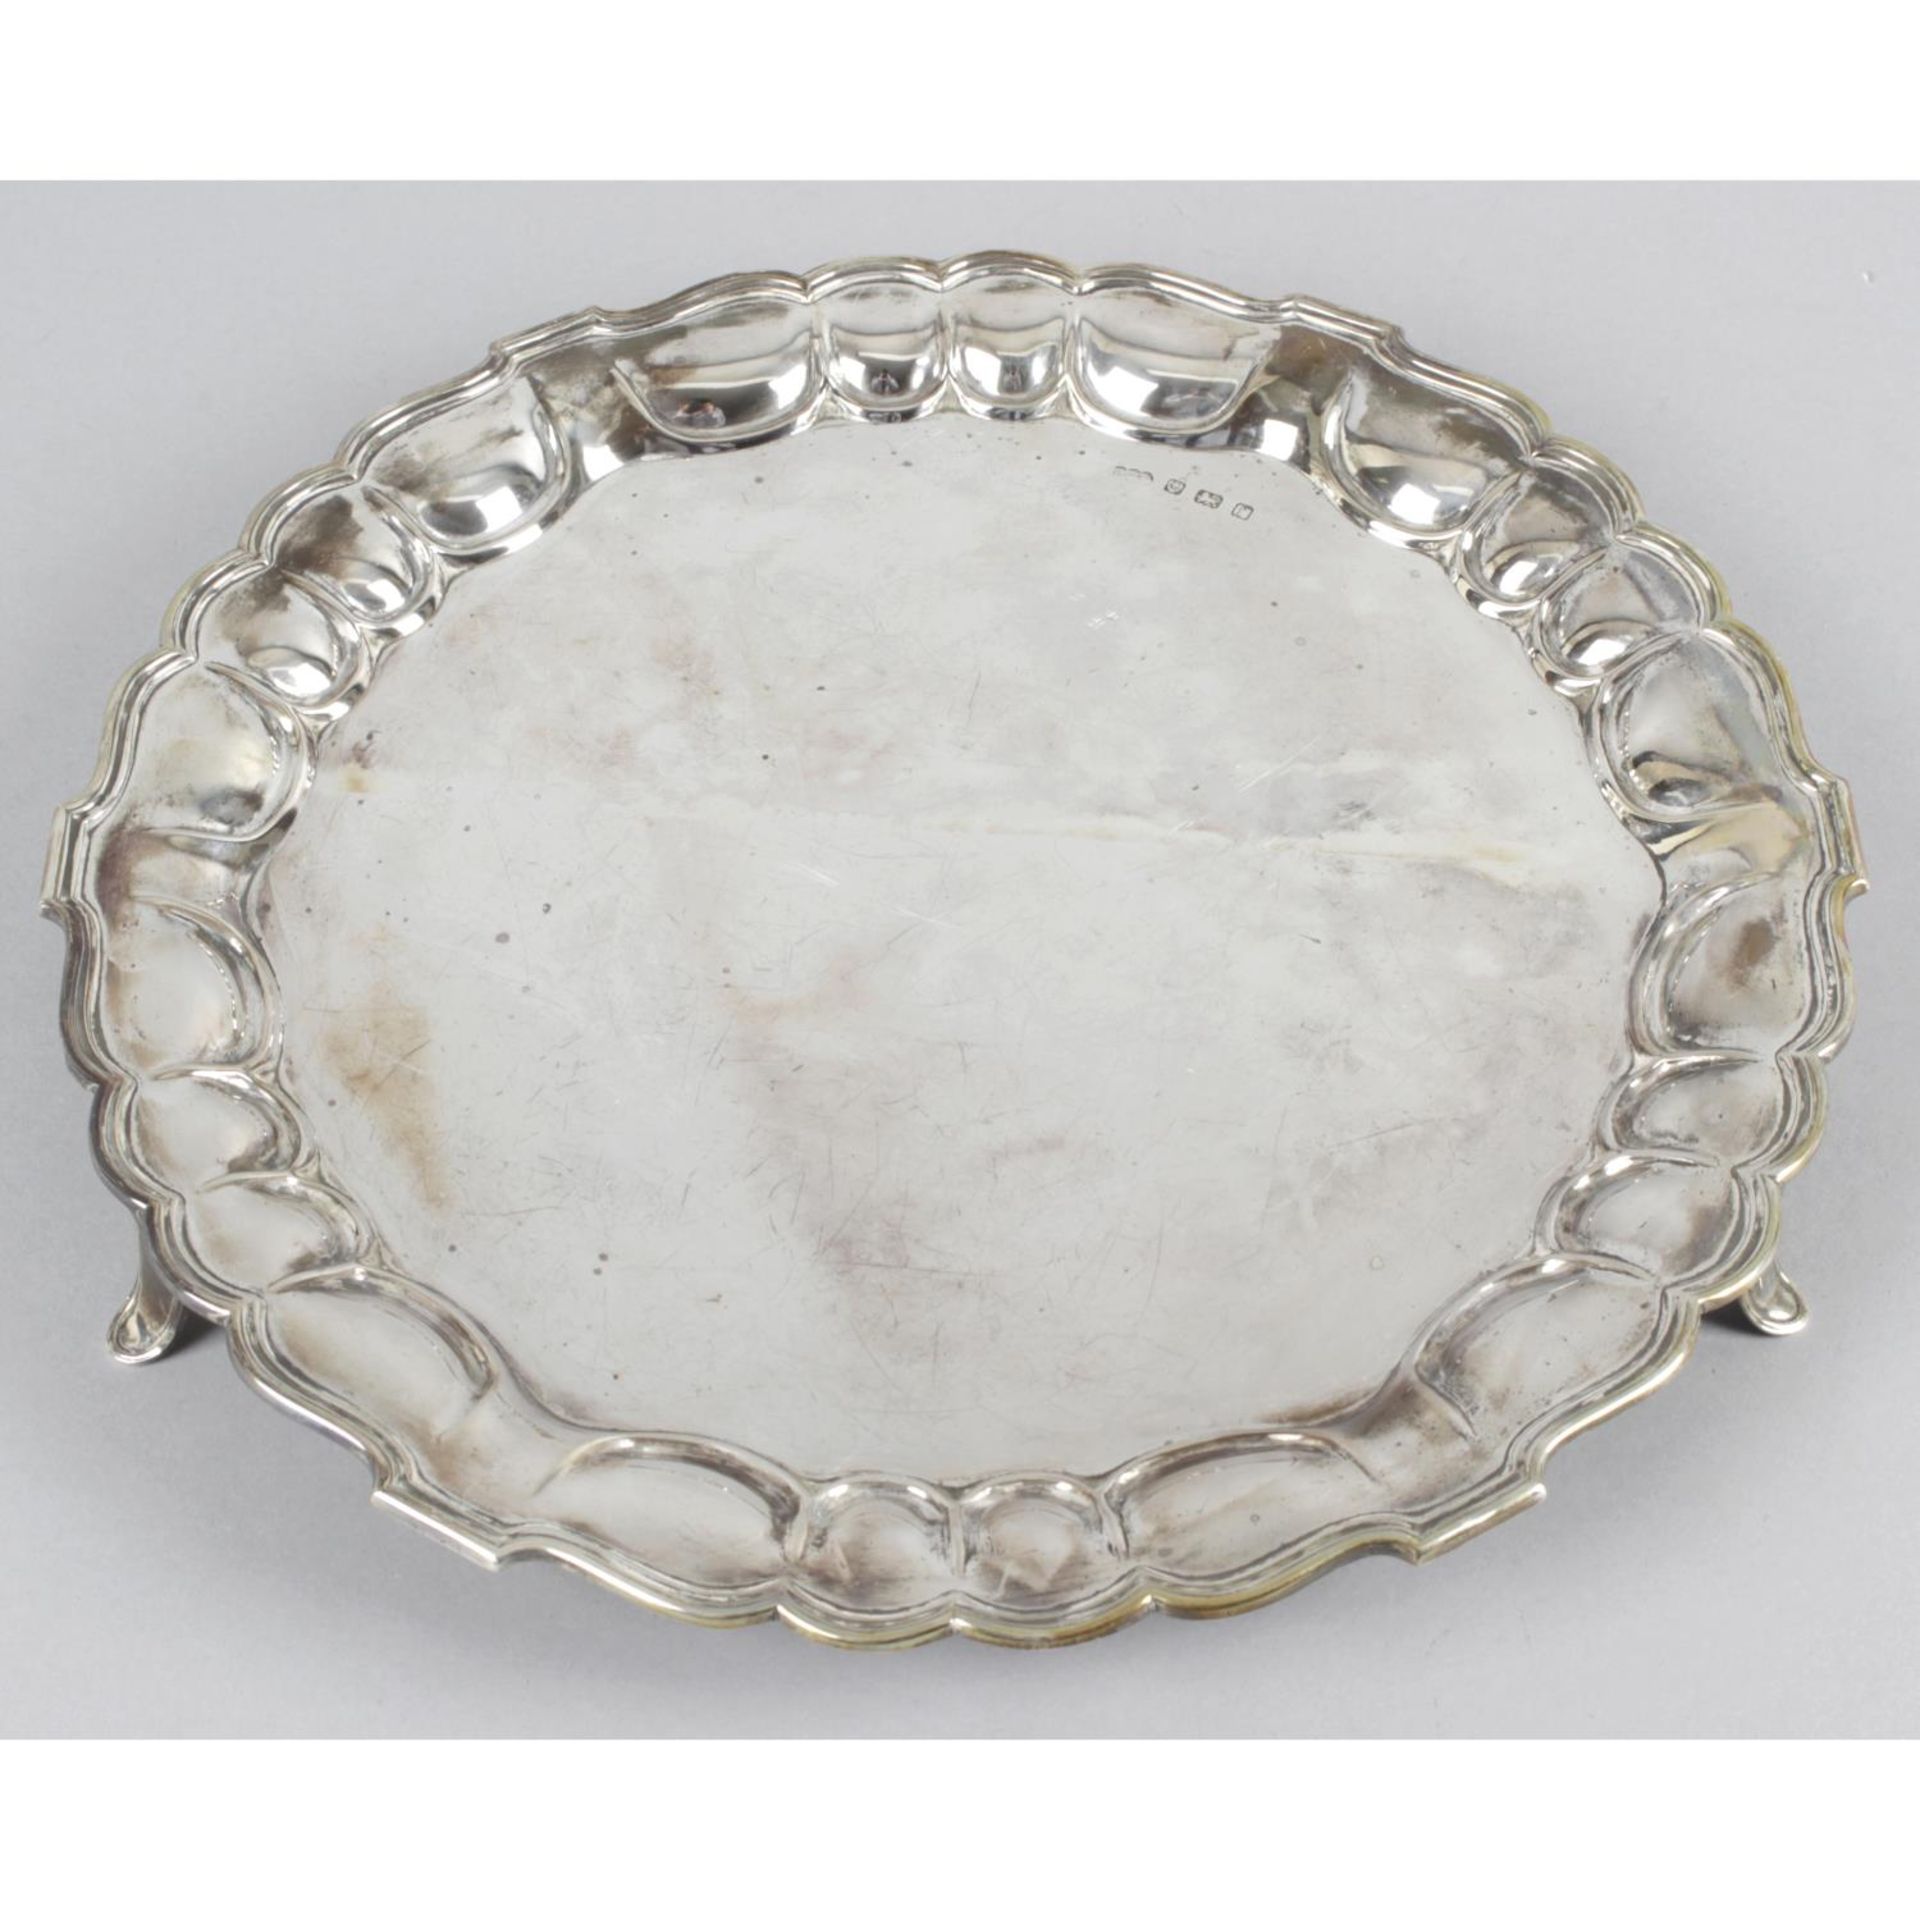 An Edwardian silver circular salver with scalloped edge and standing on three outward splaying